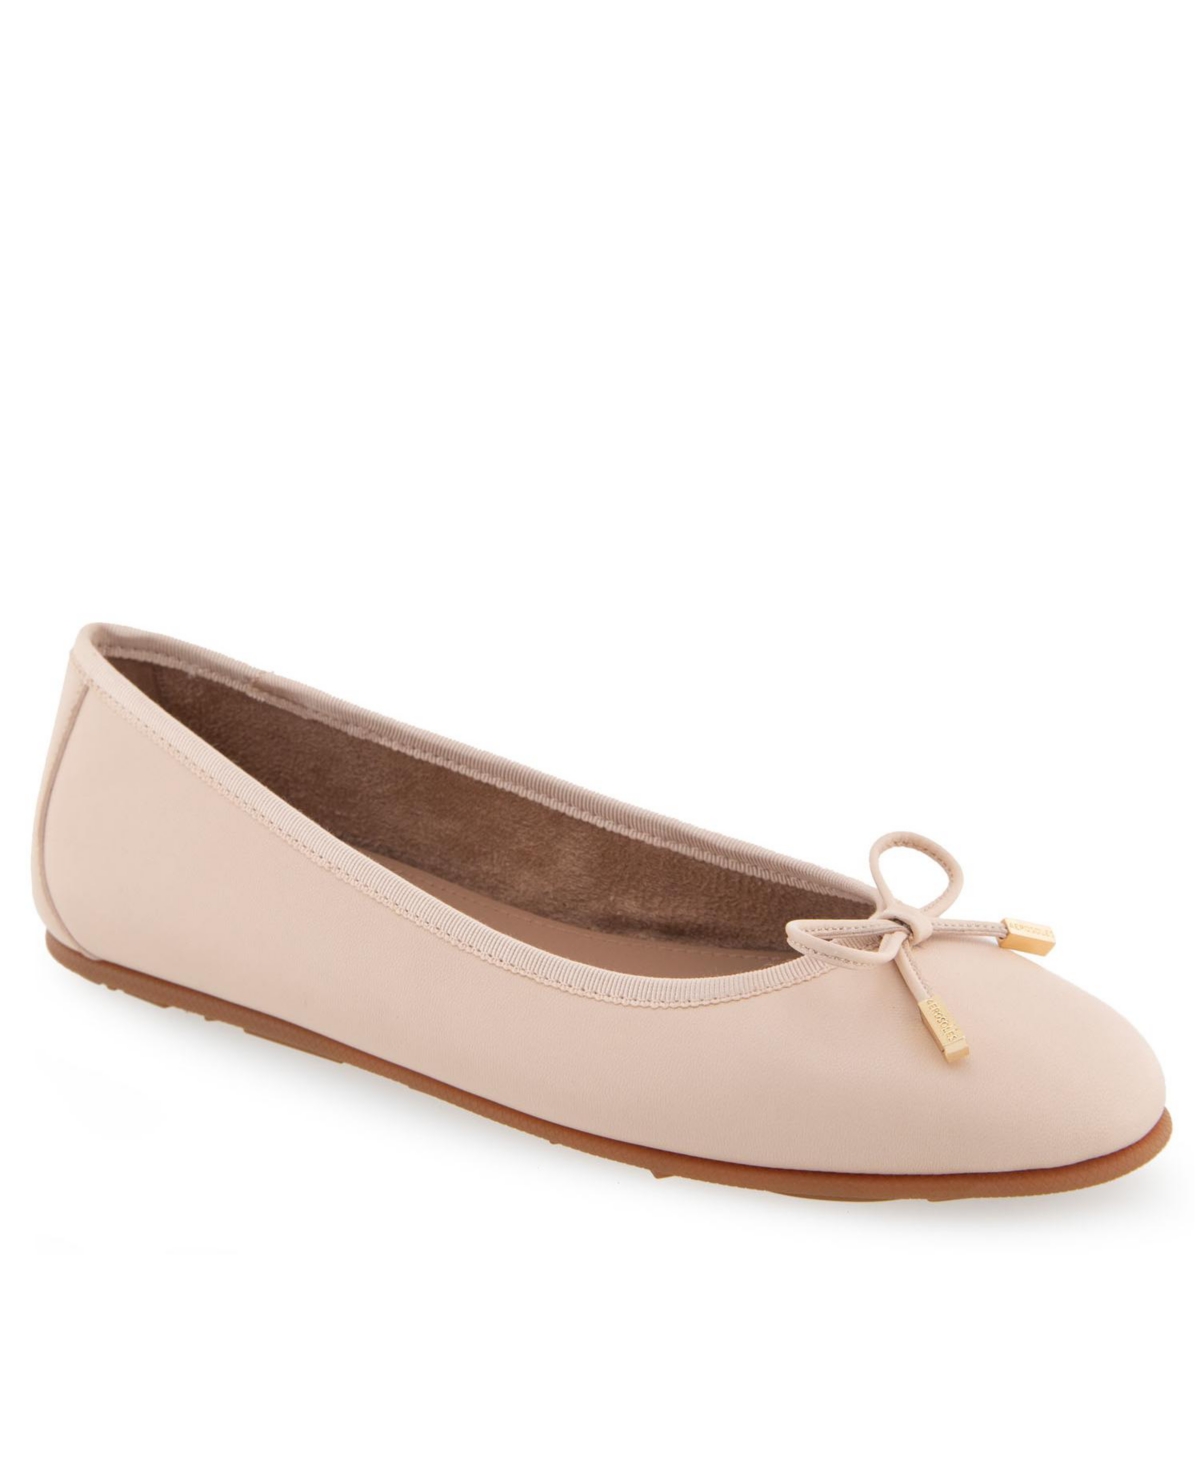 Shop Aerosoles Women's Pia Casual Ballet Wedge In Natural Leather